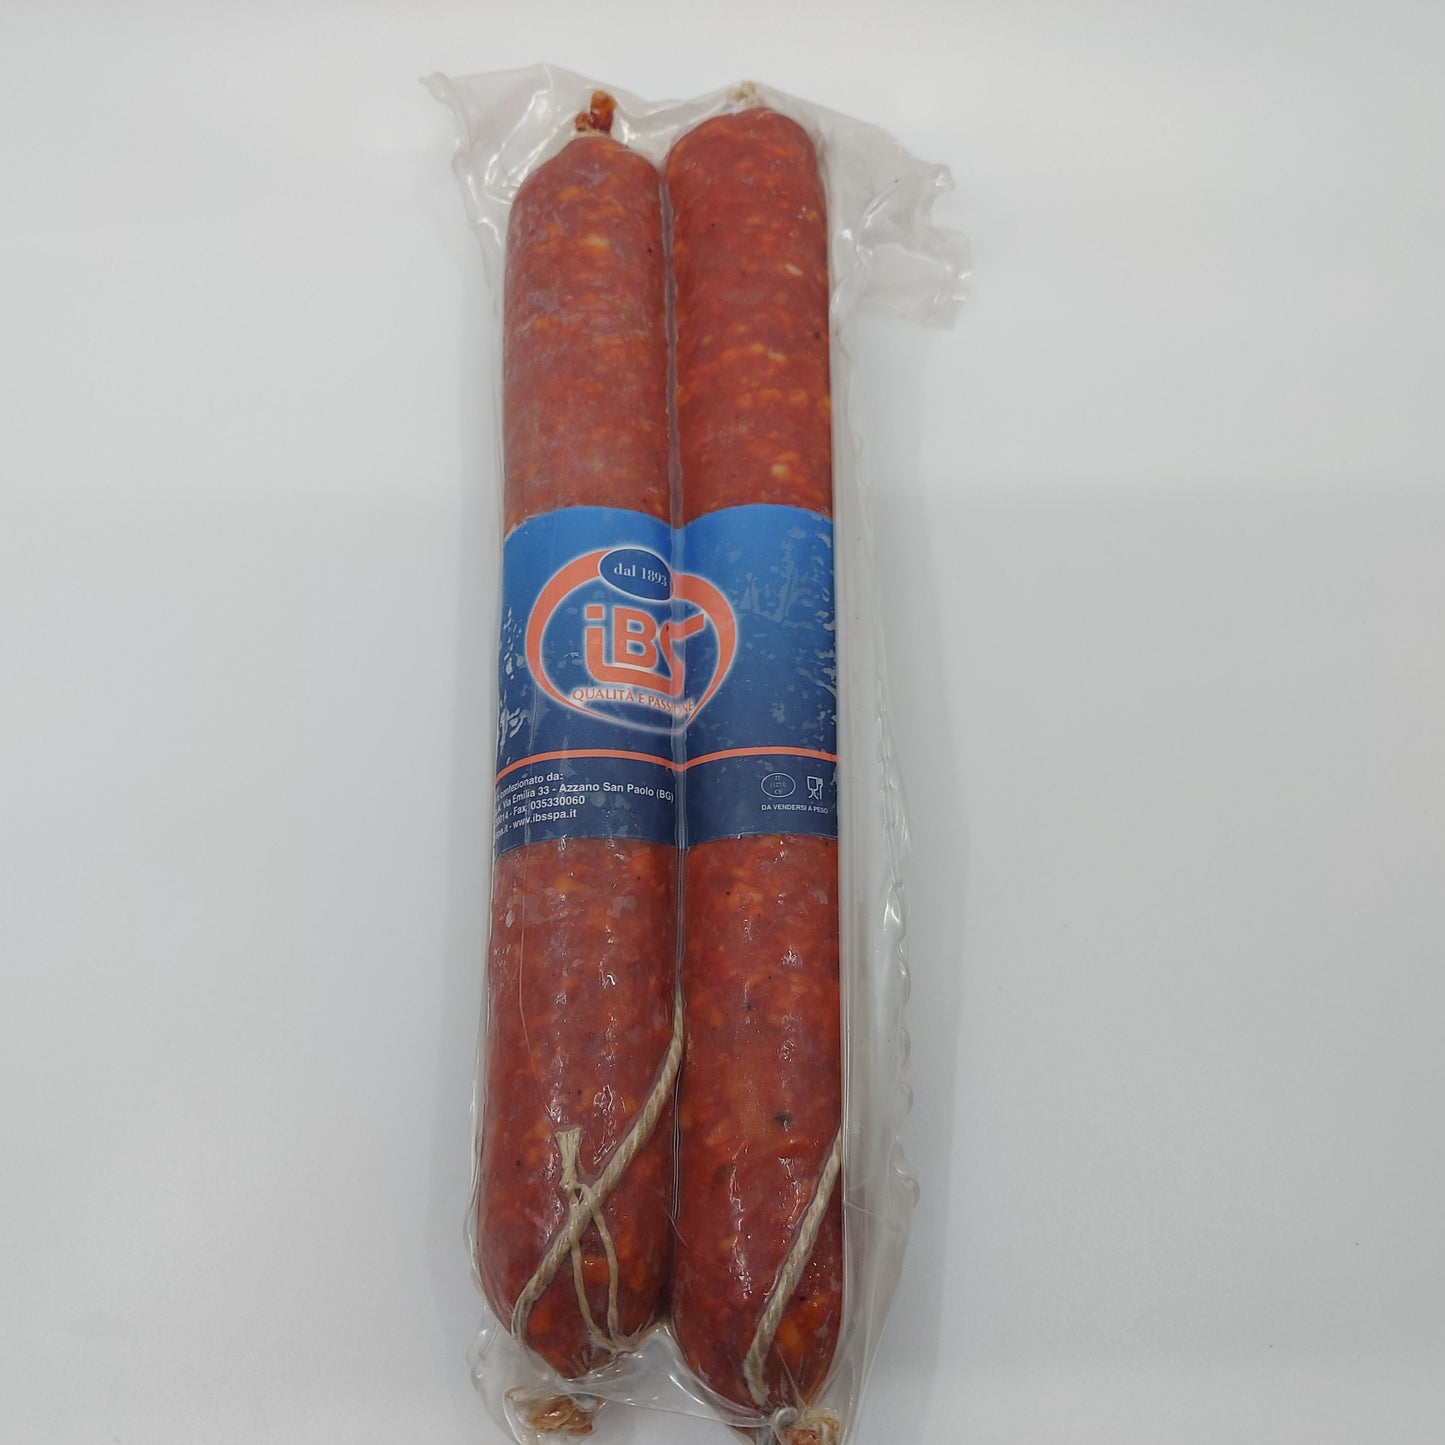 Pepperoni-spicy (1.1kg)